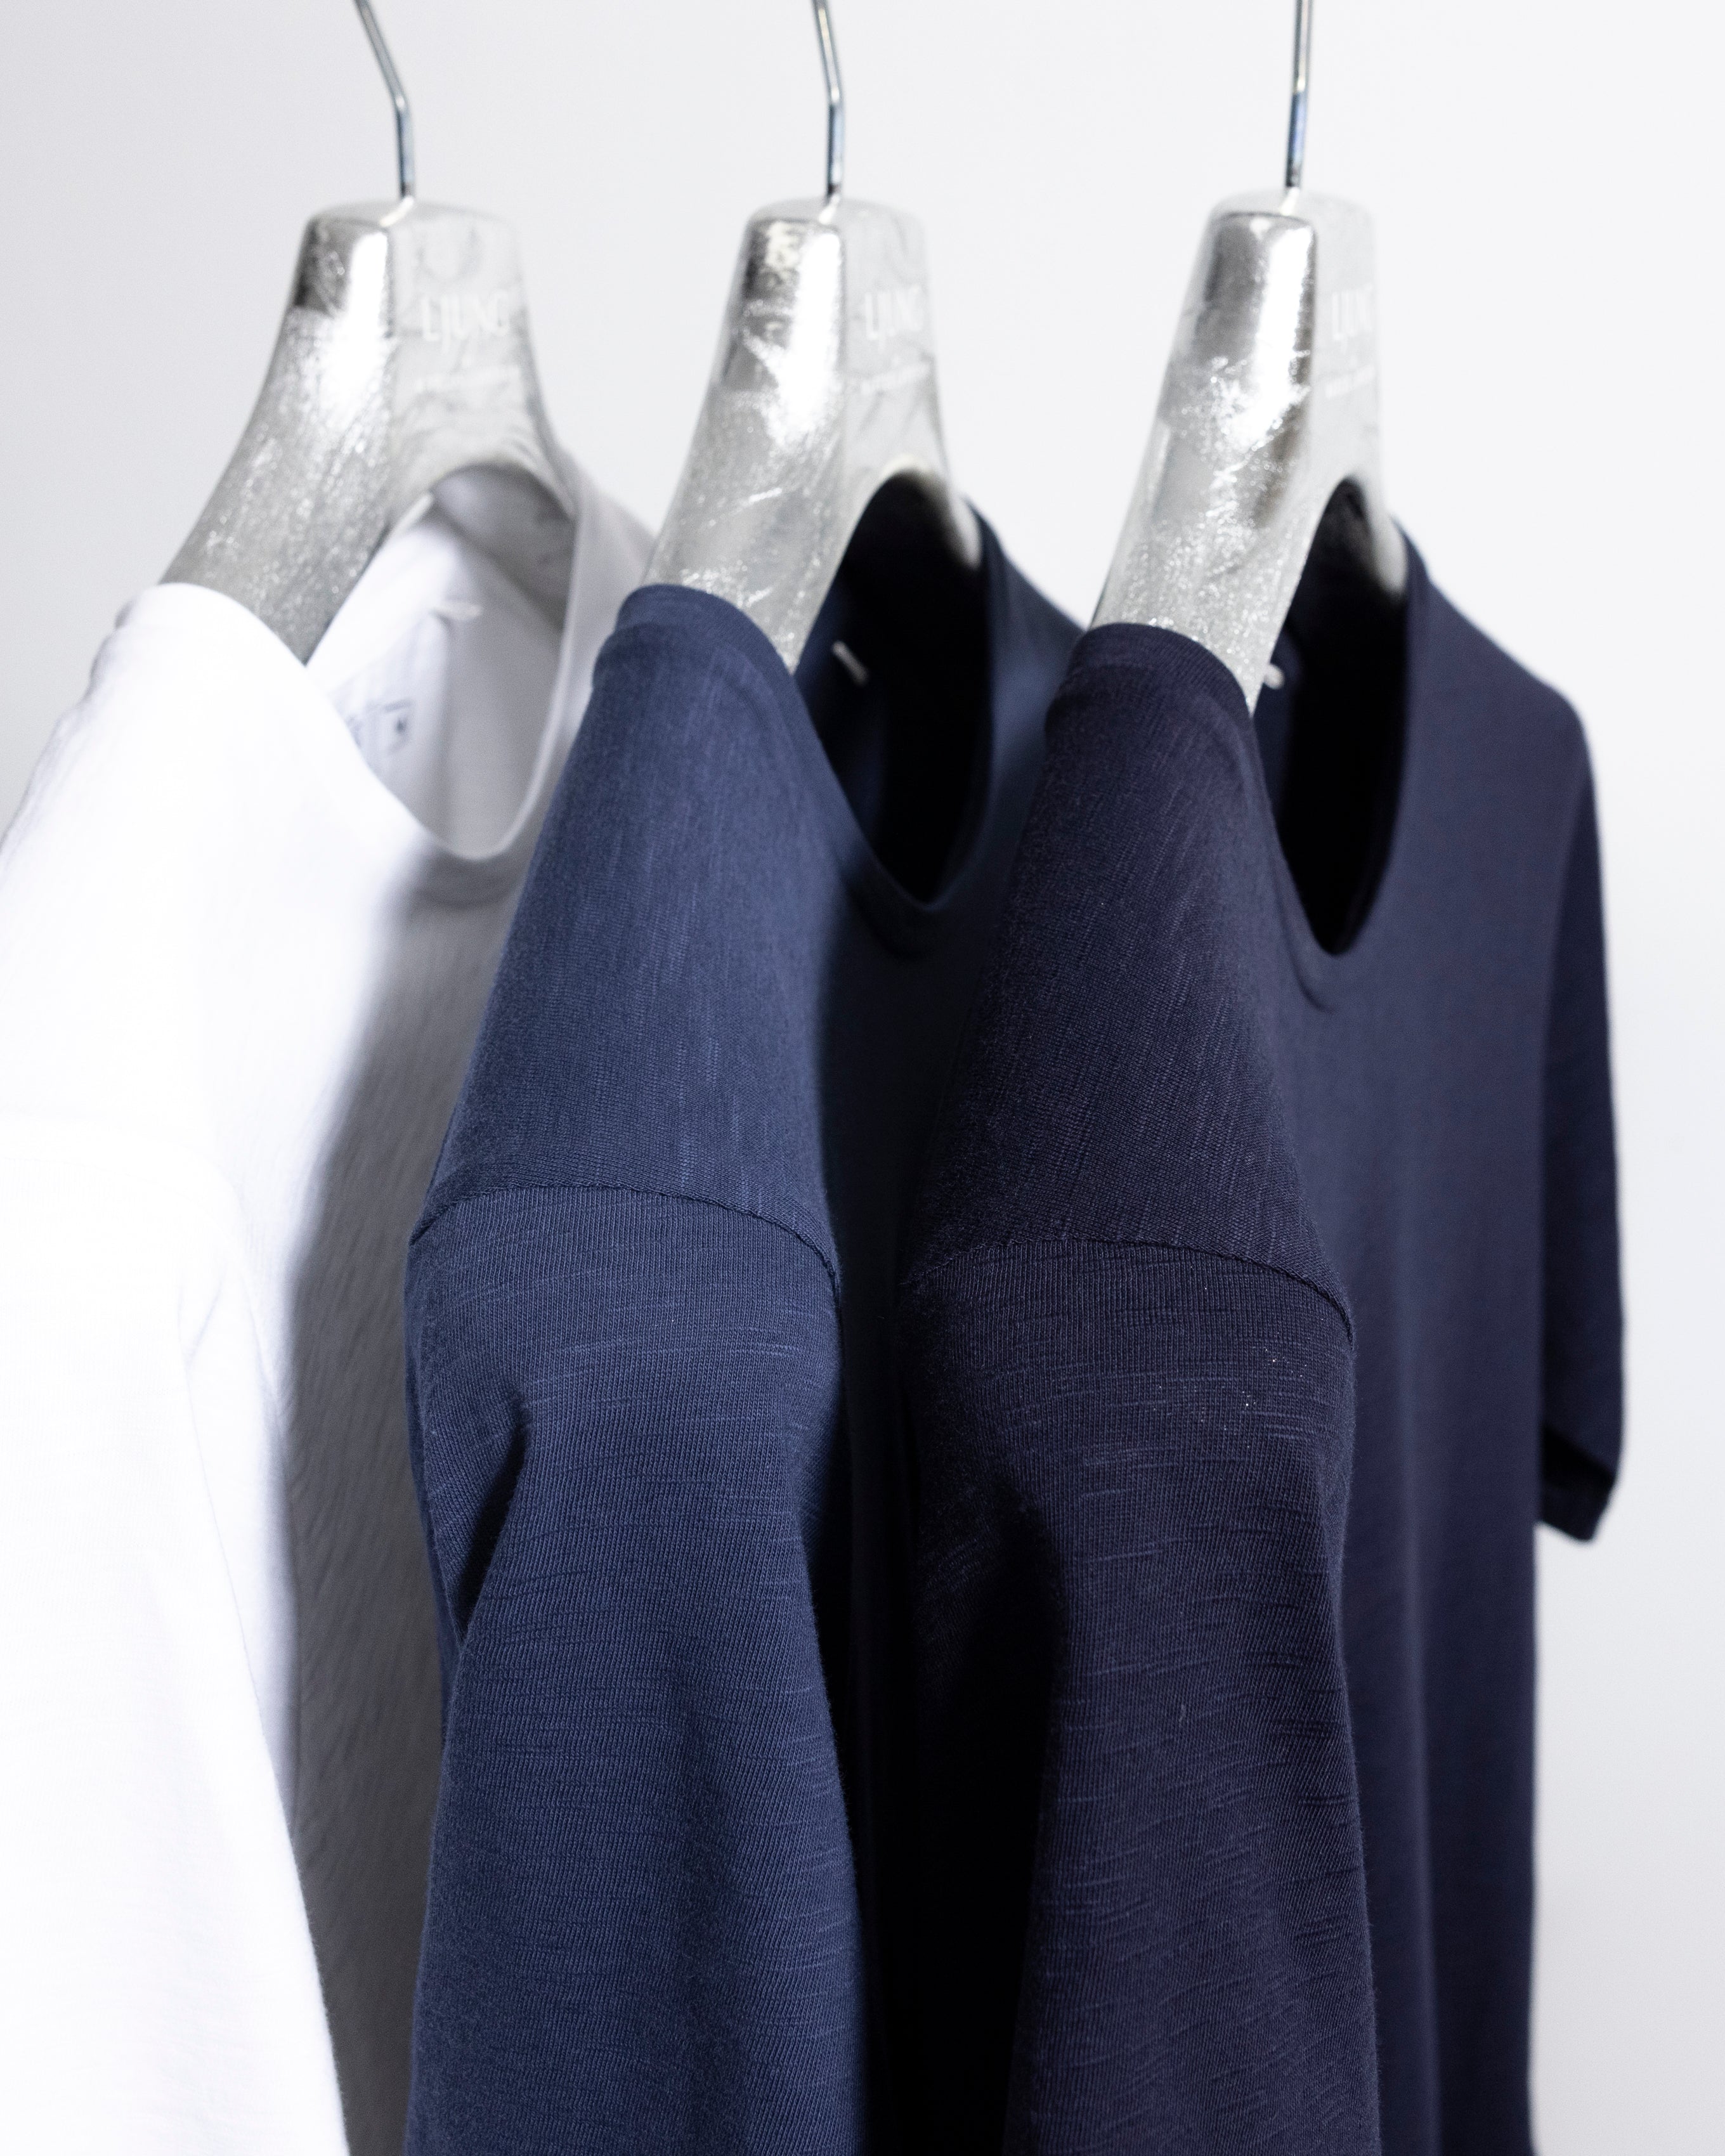 Core Tee 3 Pack - White/ Dusty Blue/ Navy-Ljung by Marcus Larsson